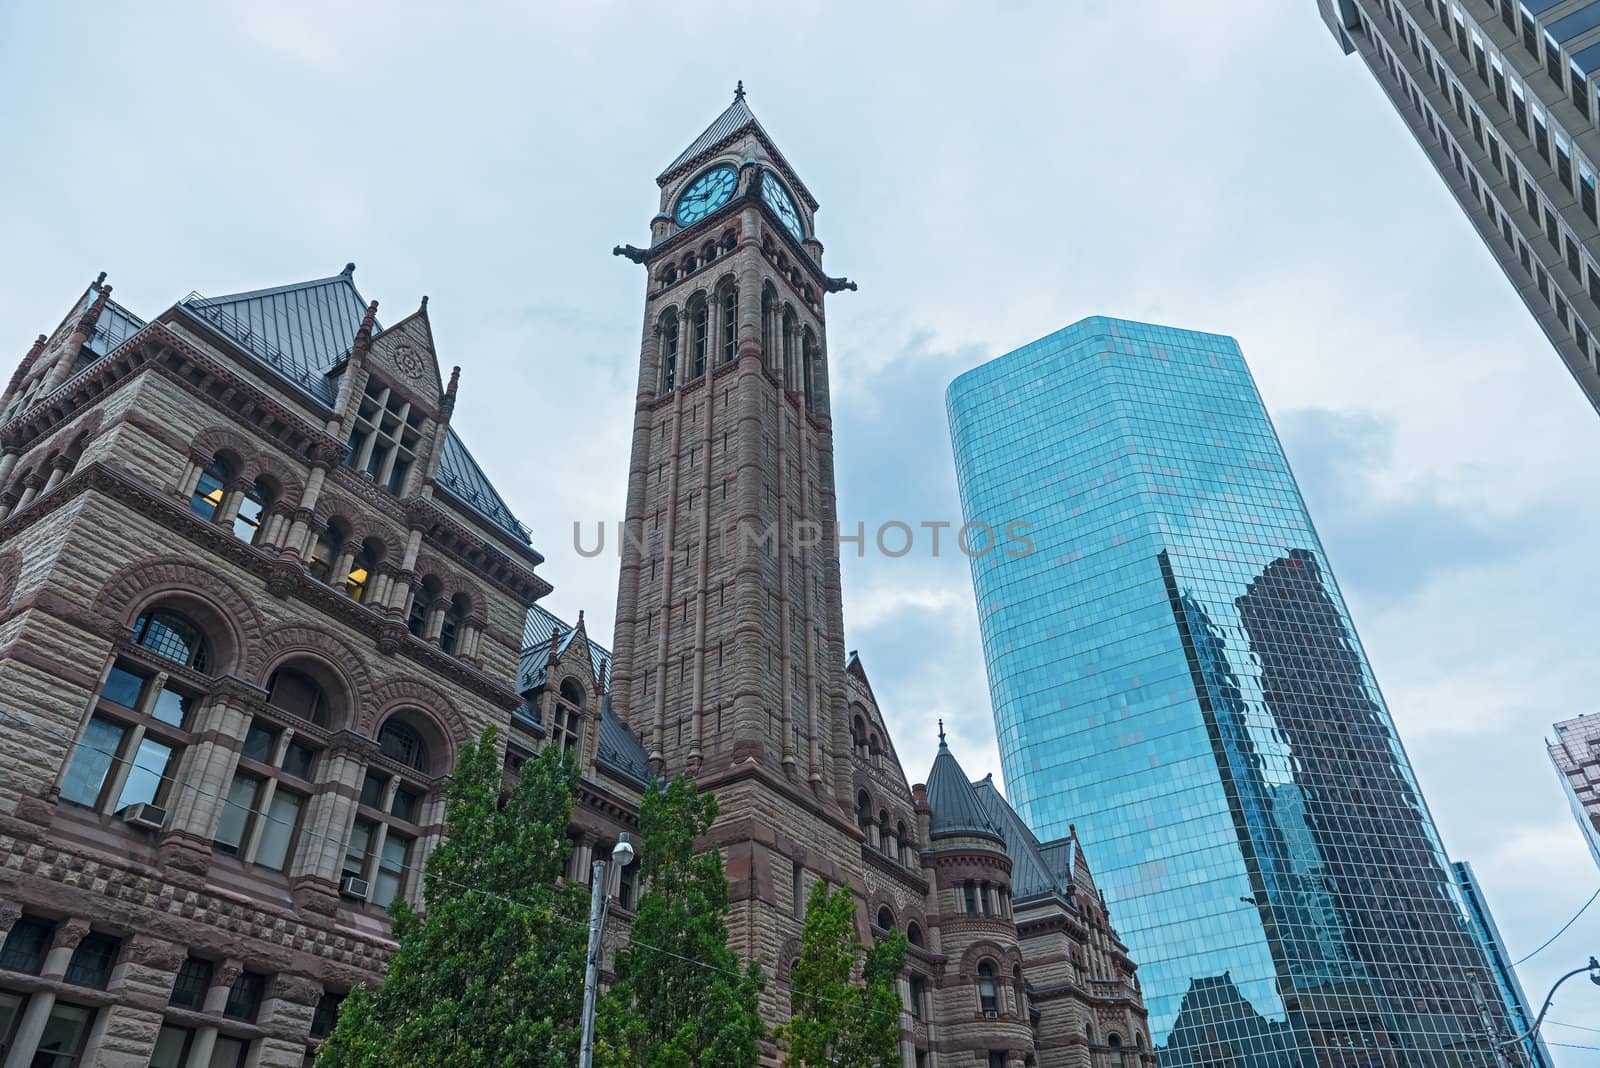 A view of the Old City Hall in Toronto with modern office buildings around it under blue skies.